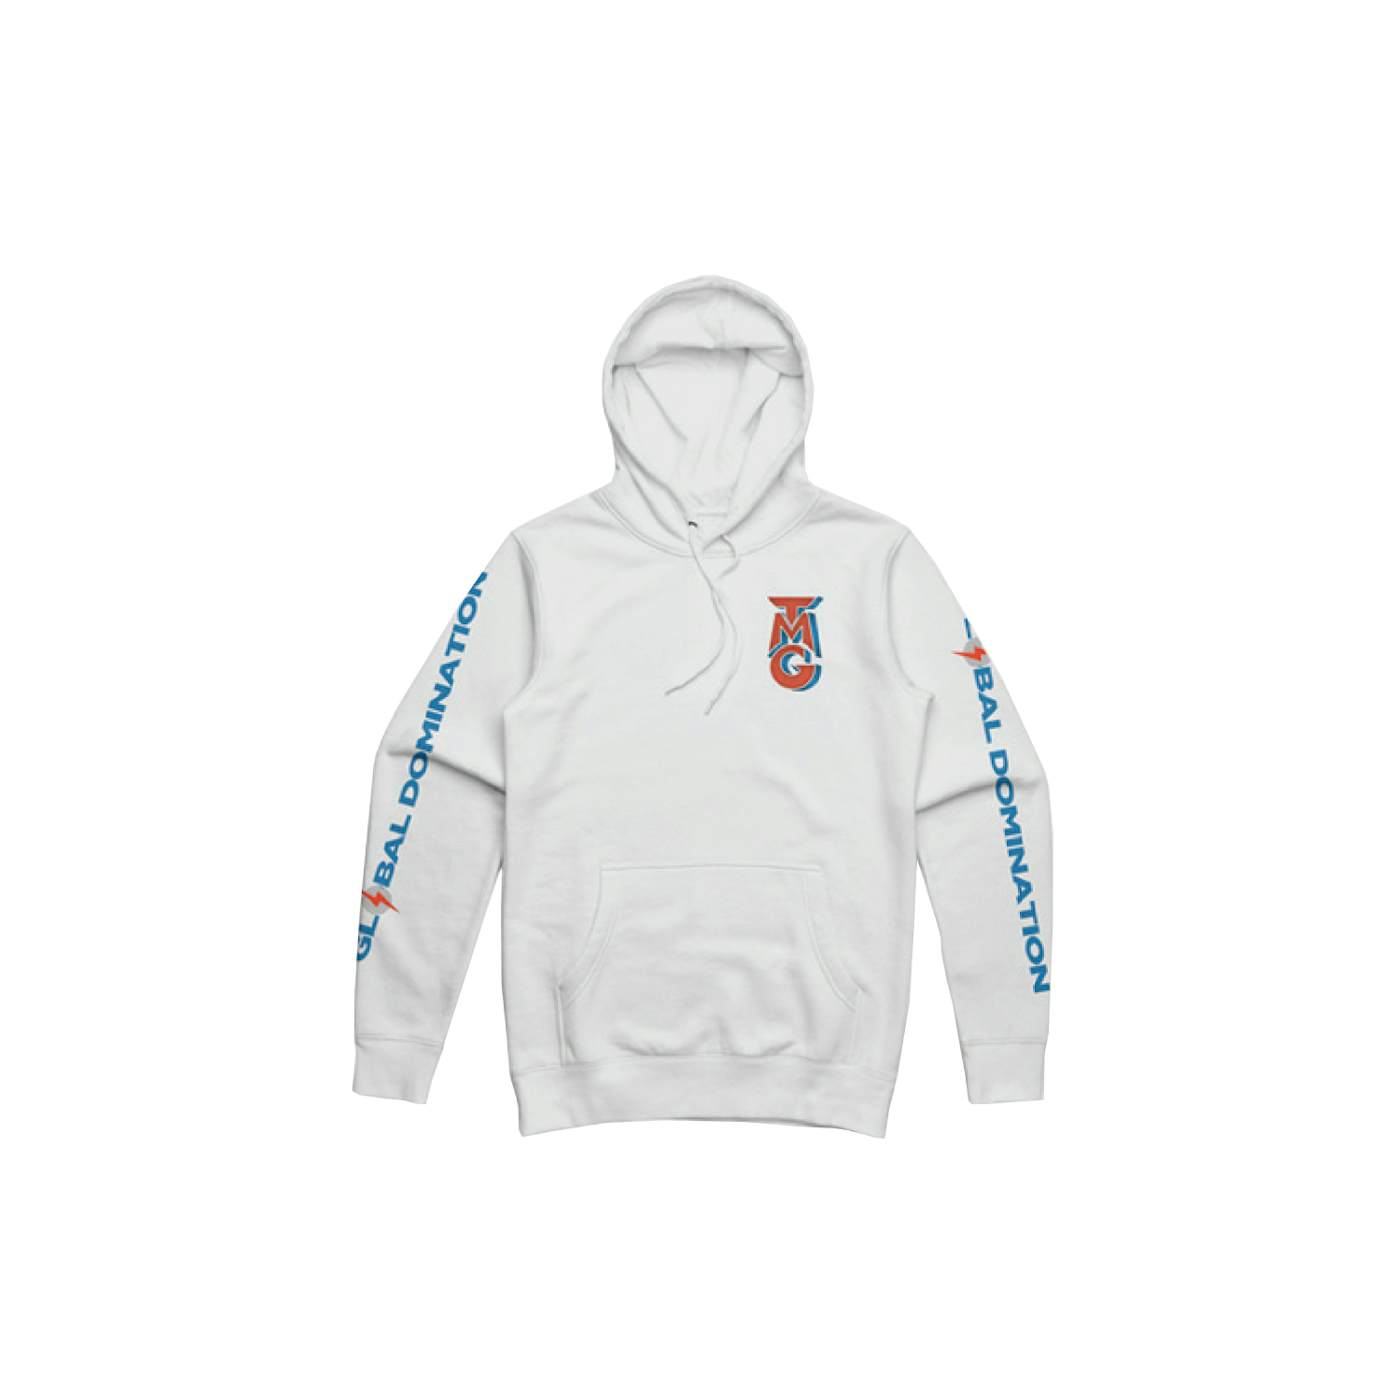 Tiny Meat Gang White Hoody